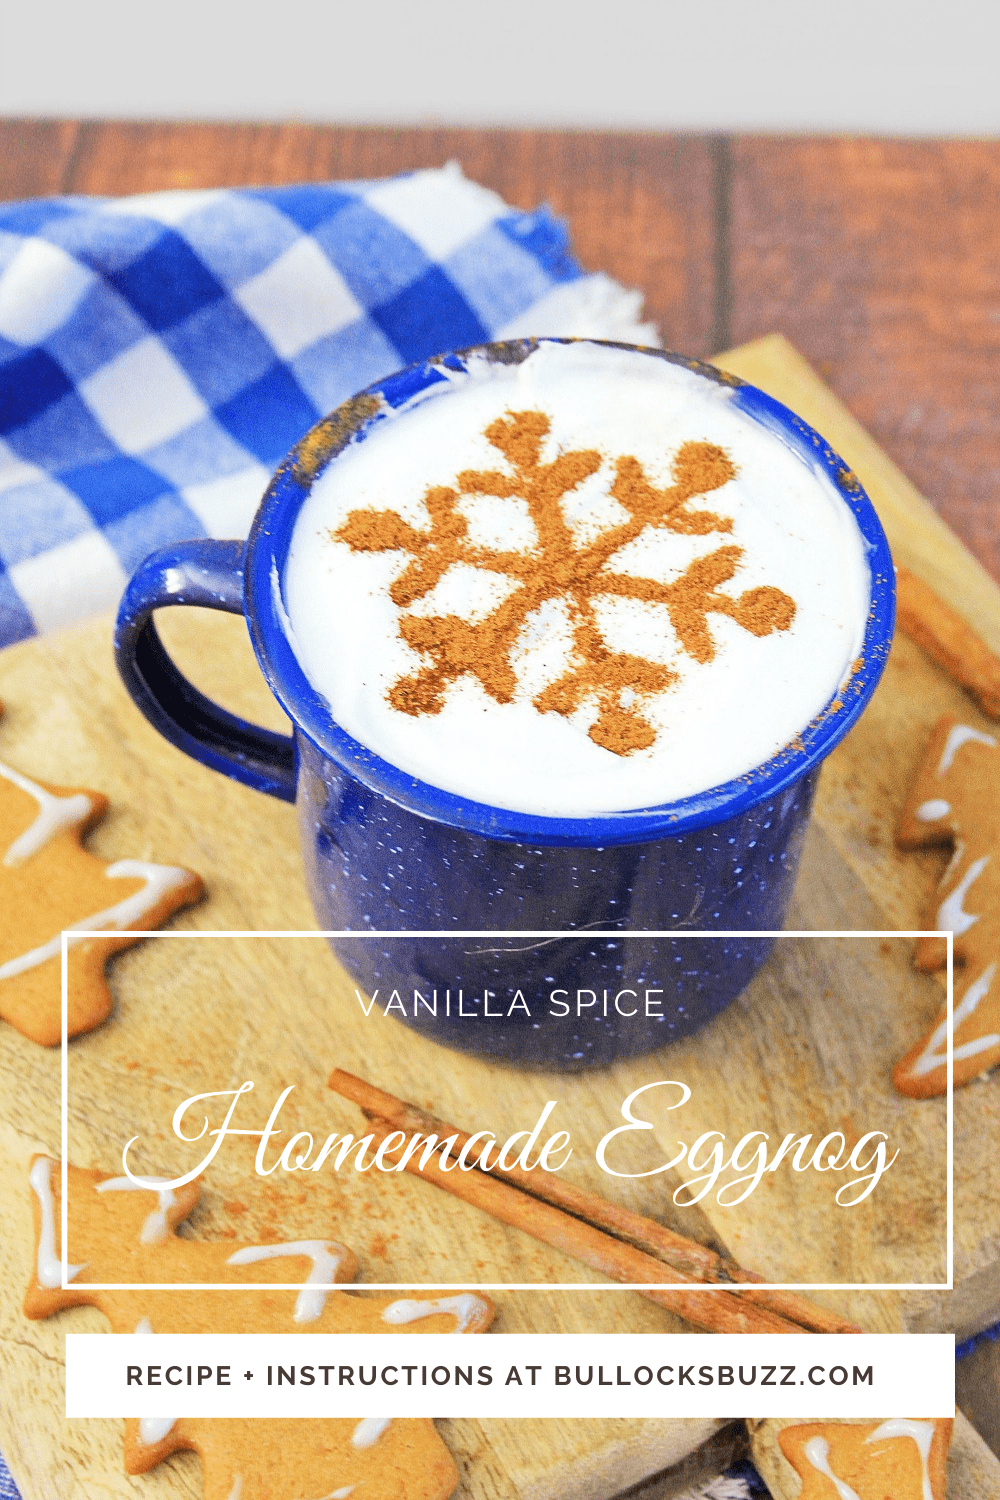 This luxuriously smooth, rich, and creamy vanilla spice eggnog is like Christmas in a cup! After trying this Homemade Eggnog Recipe, I promise you will never buy store-bought eggnog again! Get the #recipe on the blog at bullocksbuzz!